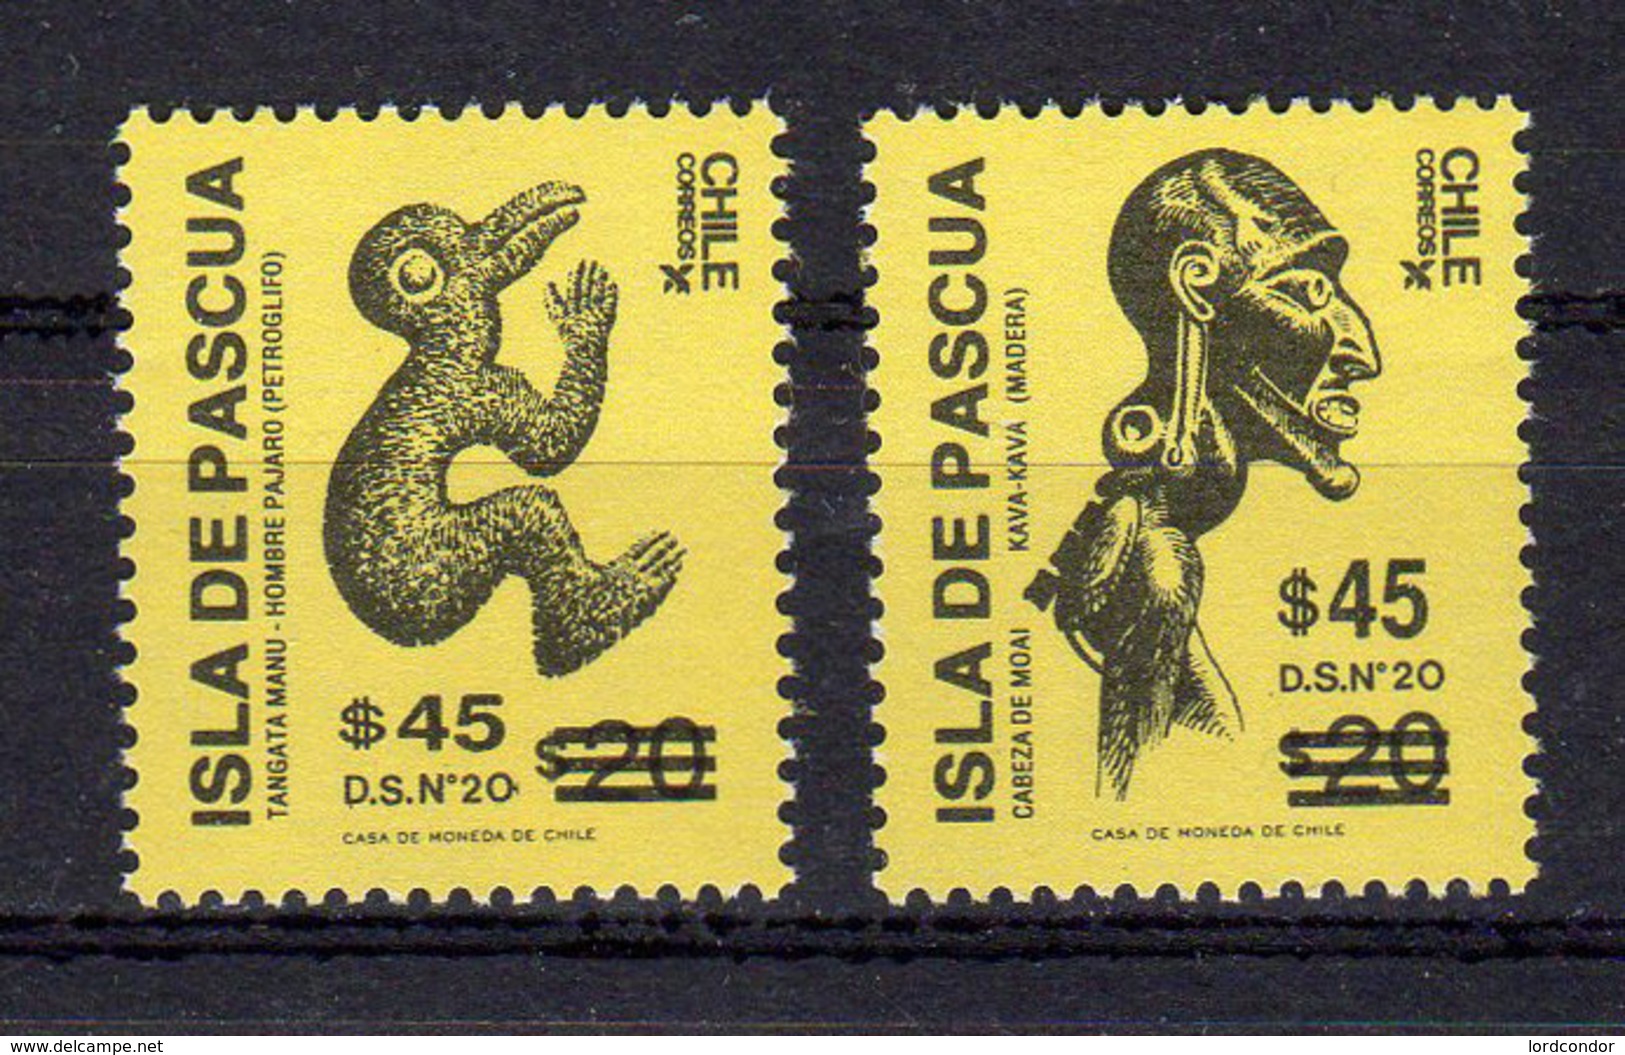 CHILE - 1988 – 1991 – Easter Island DS N°20, Surcharged, Folk, Art - VF MNH - Chile